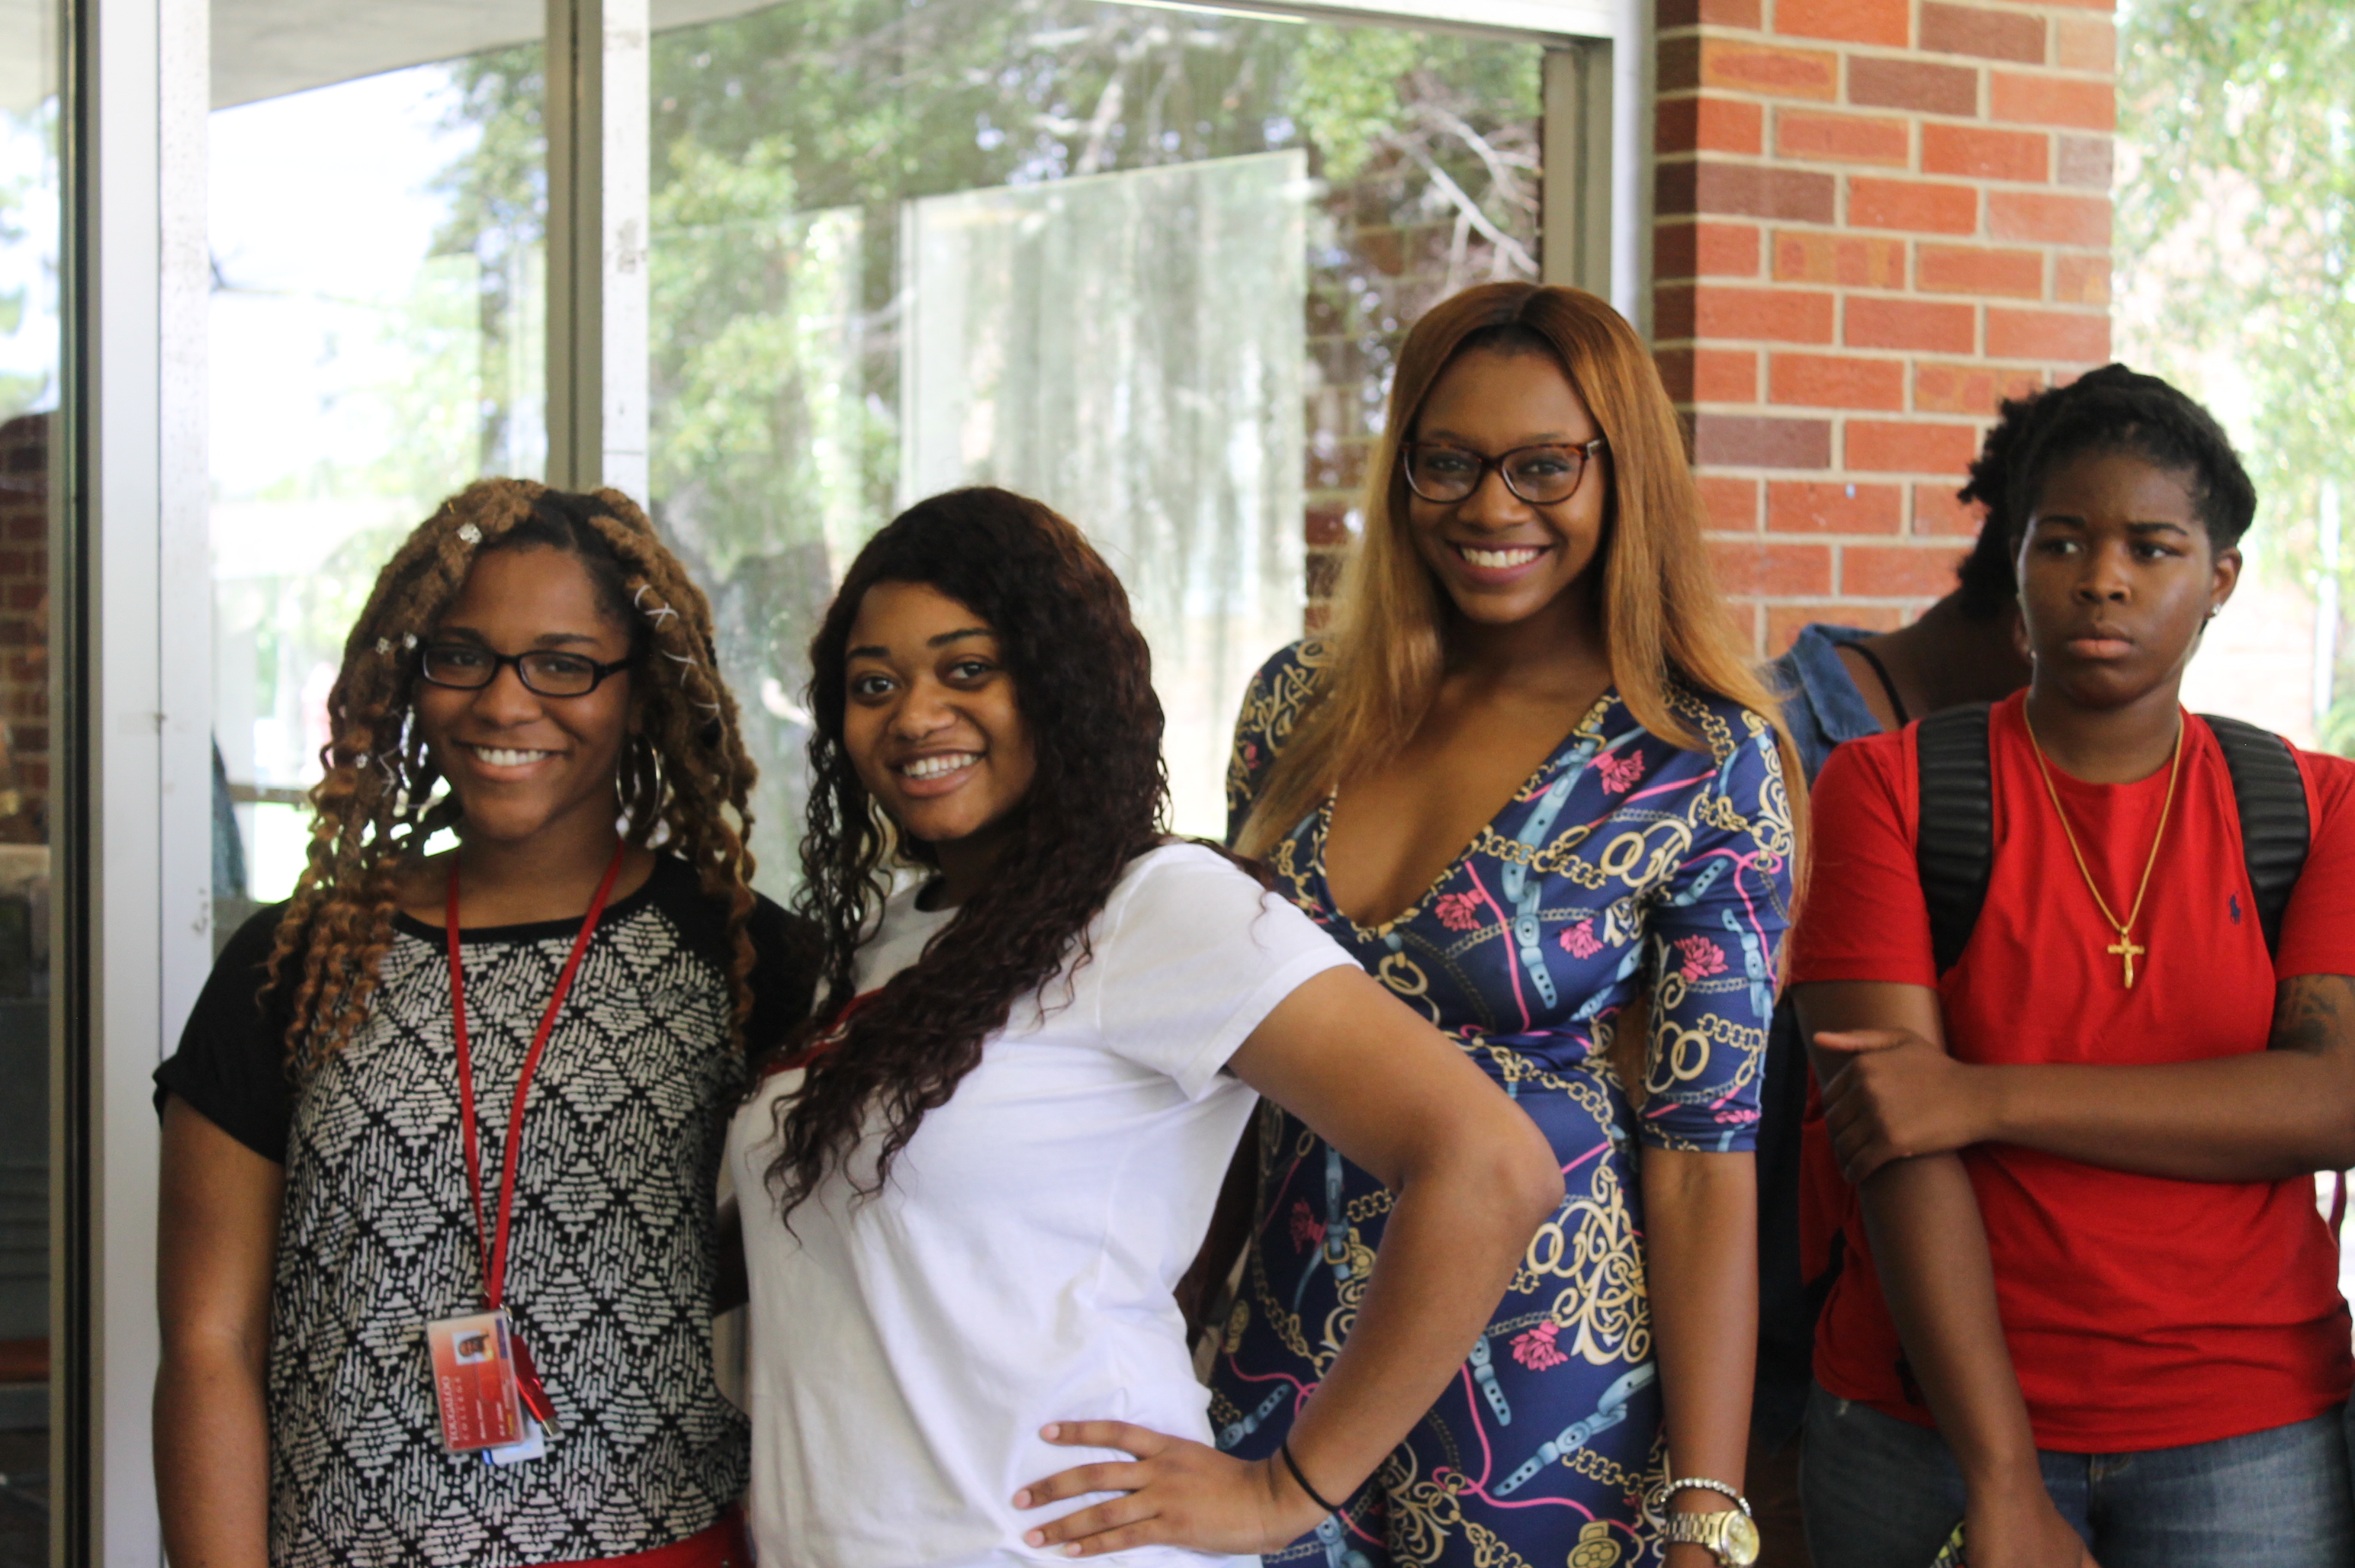 Student Activiites at Tougaloo College